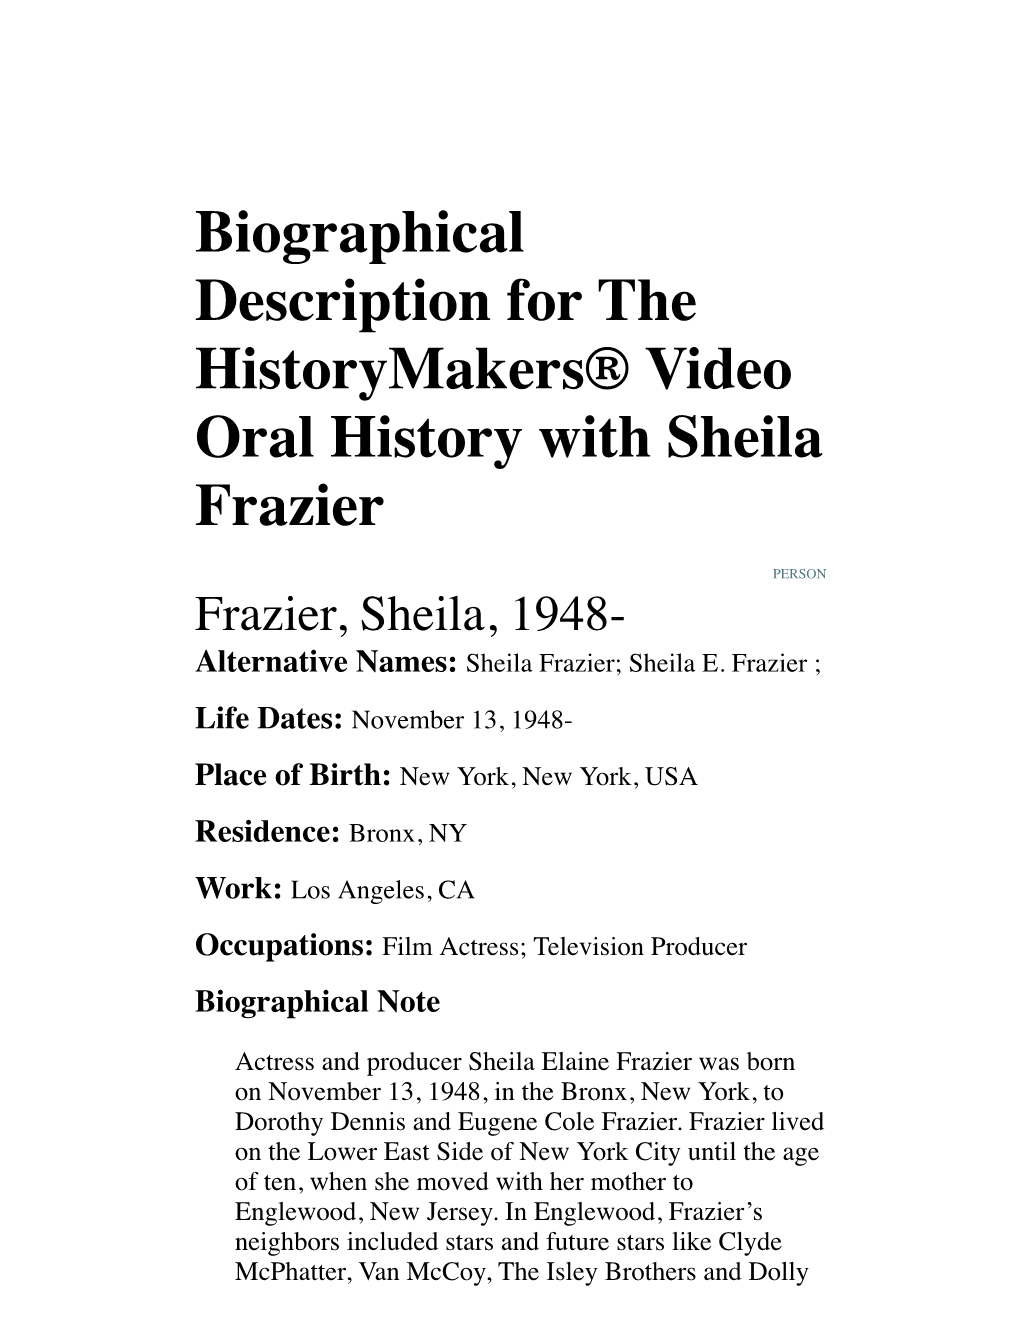 Biographical Description for the Historymakers® Video Oral History with Sheila Frazier